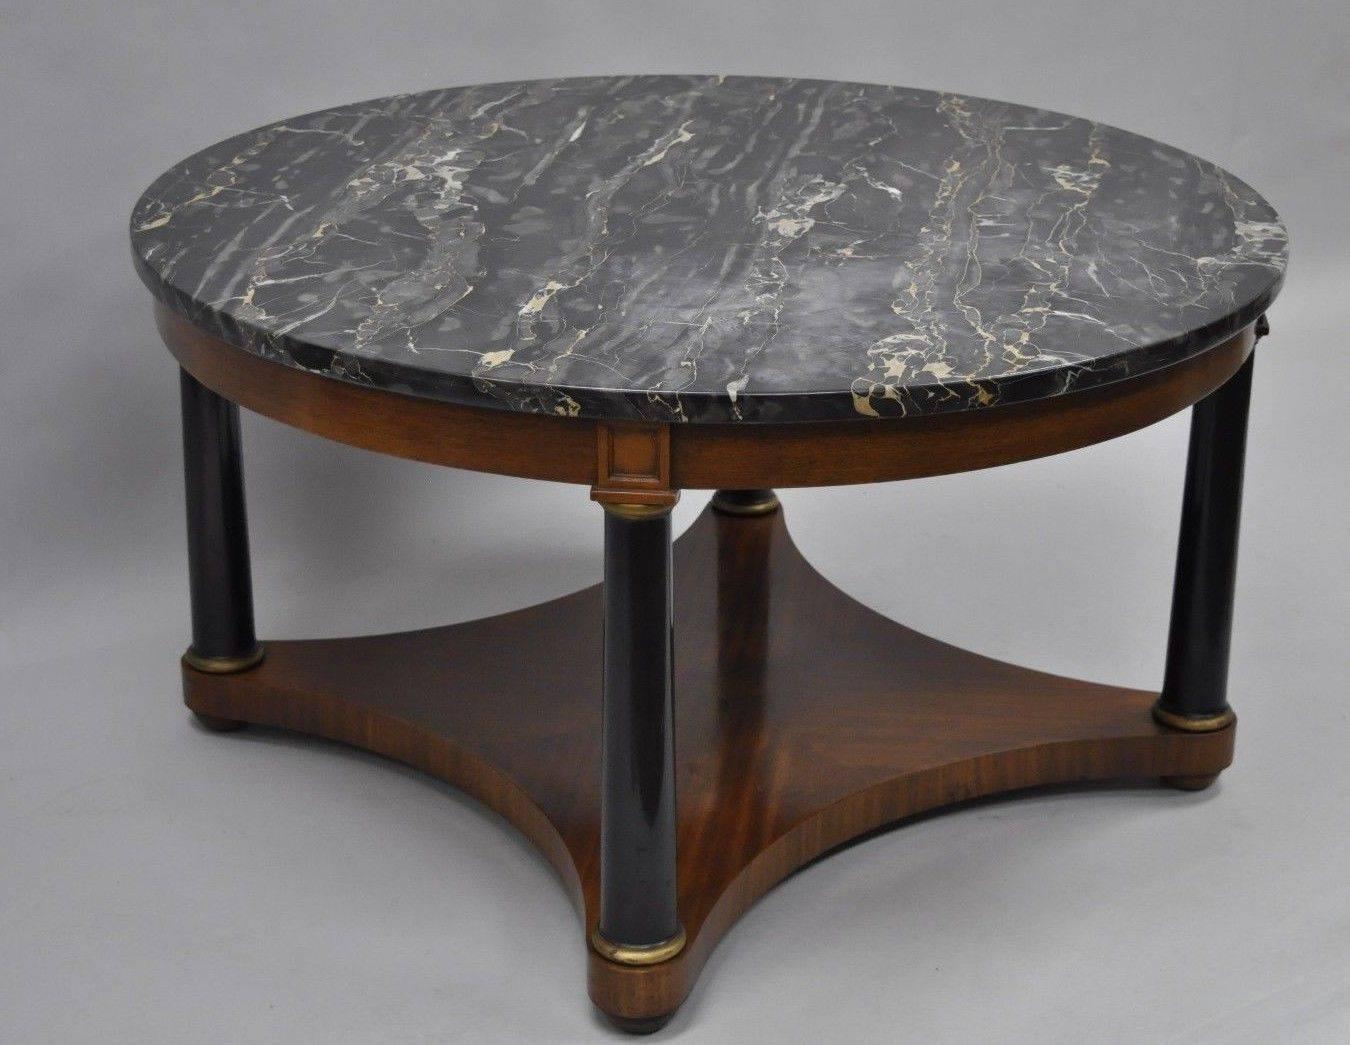 Antique Round Marble-Top Empire Style Coffee Table Mahogany Black Columns 3